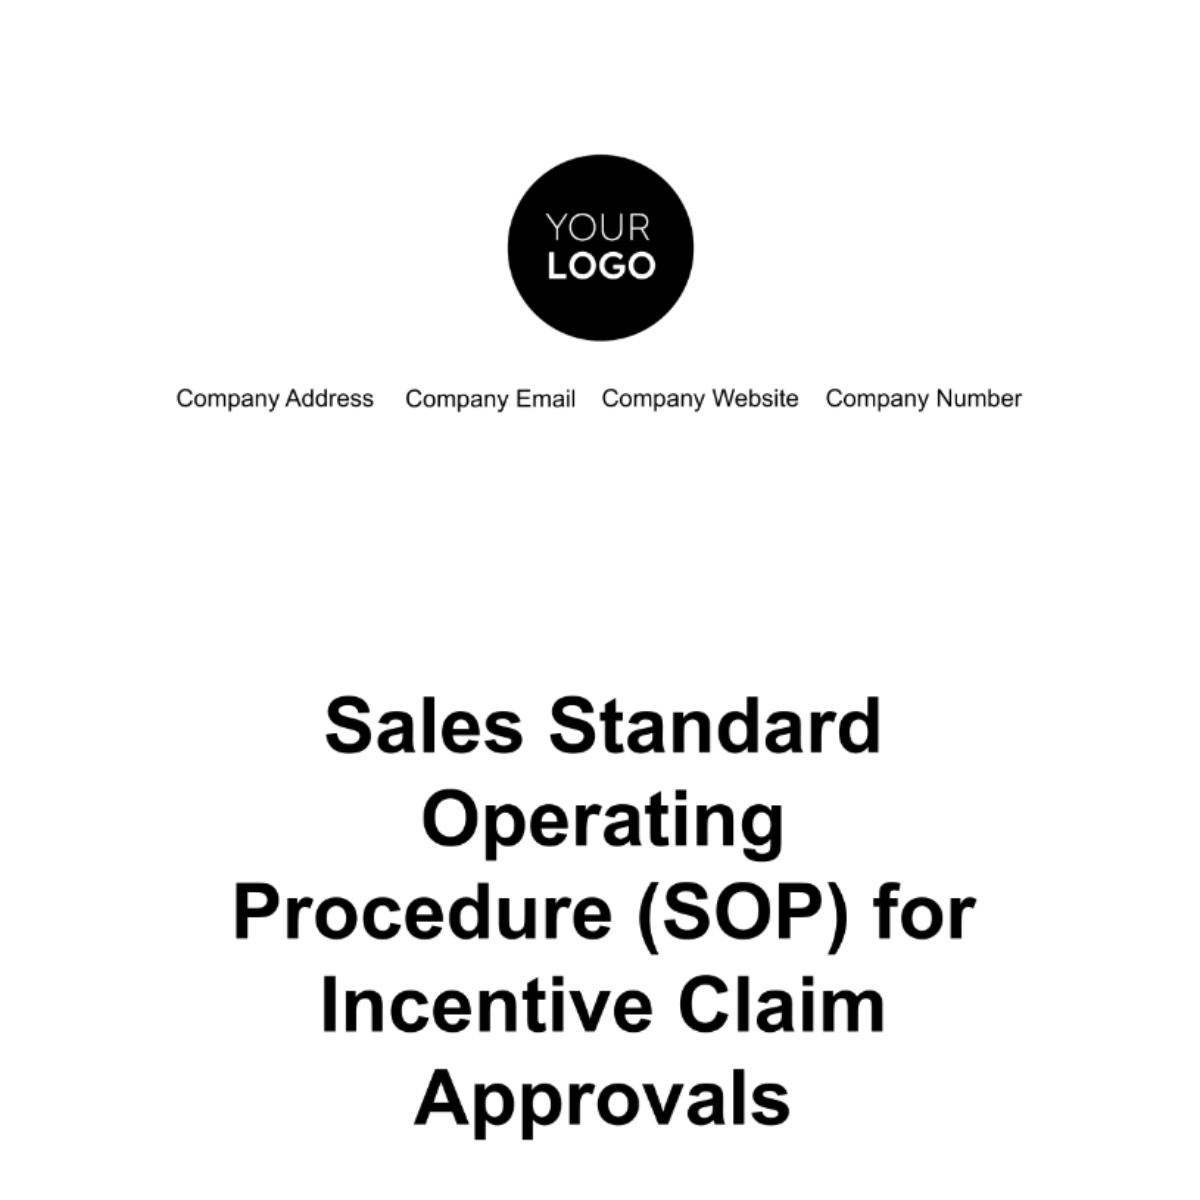 Sales Standard Operating Procedure (SOP) for Incentive Claim Approvals Template